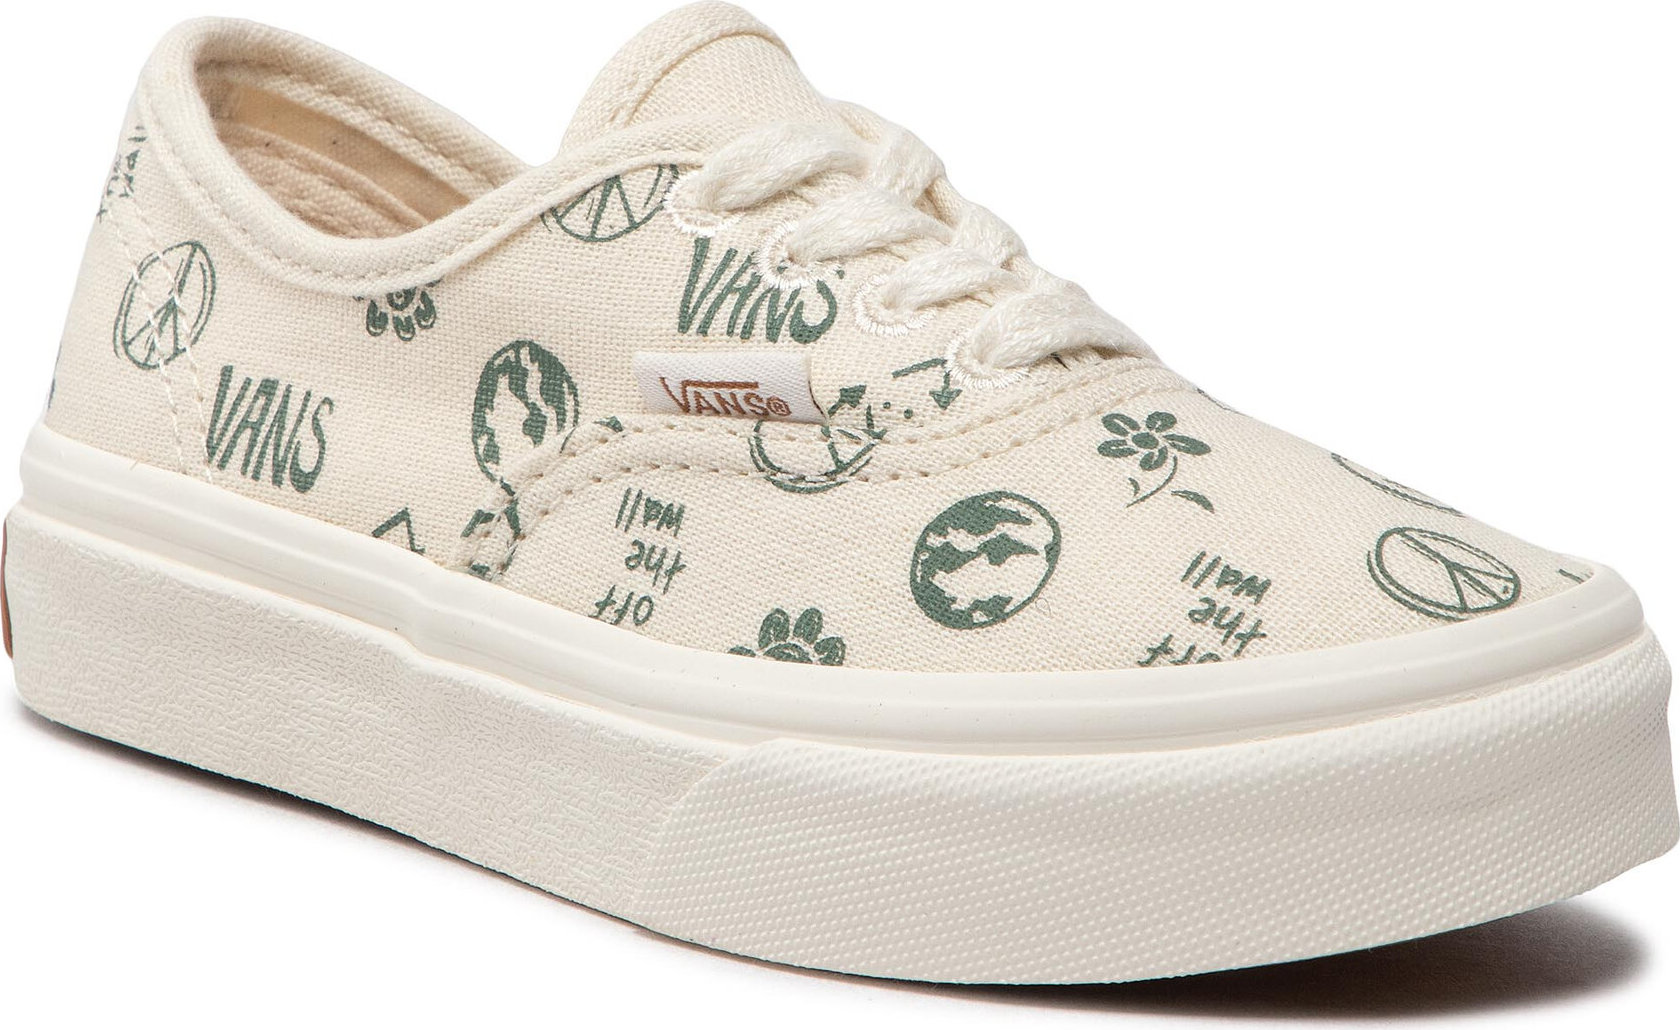 Tenisky Vans Authentic VN0A3UIVWHT1 Eco Theory In Our Hands W